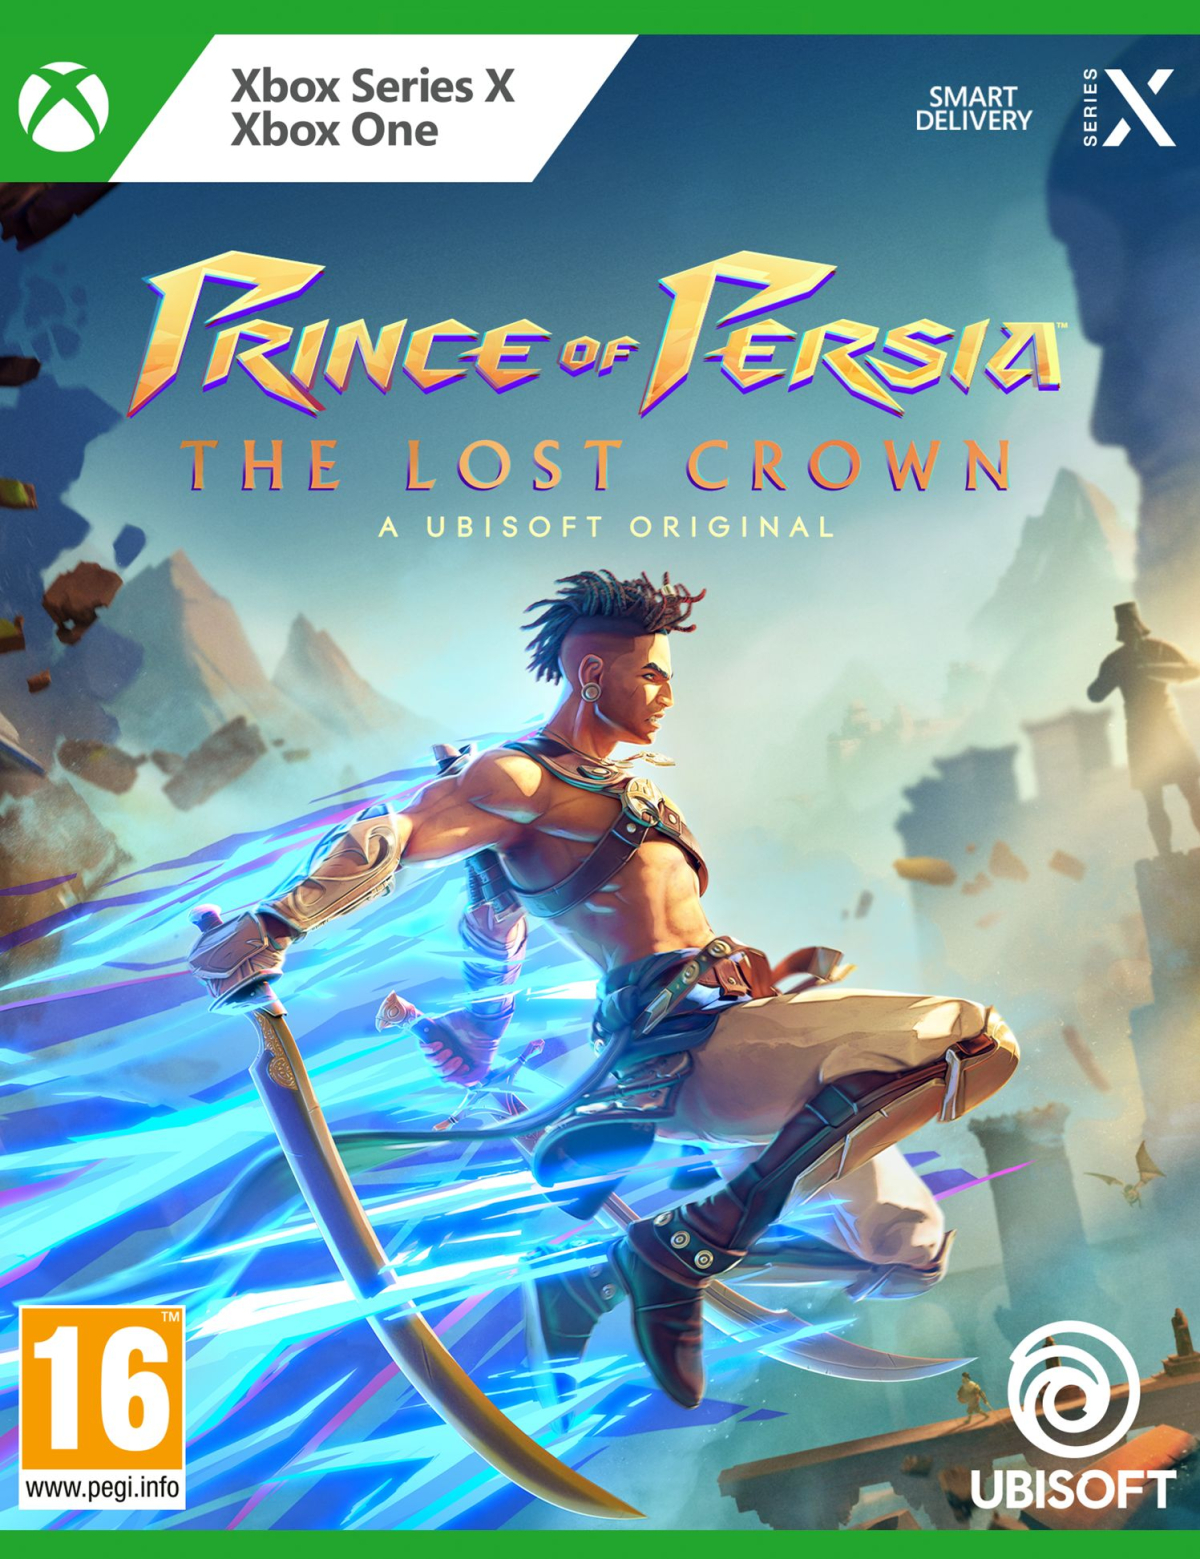 XBOXOne/SeriesX Prince of Persia The Lost Crown